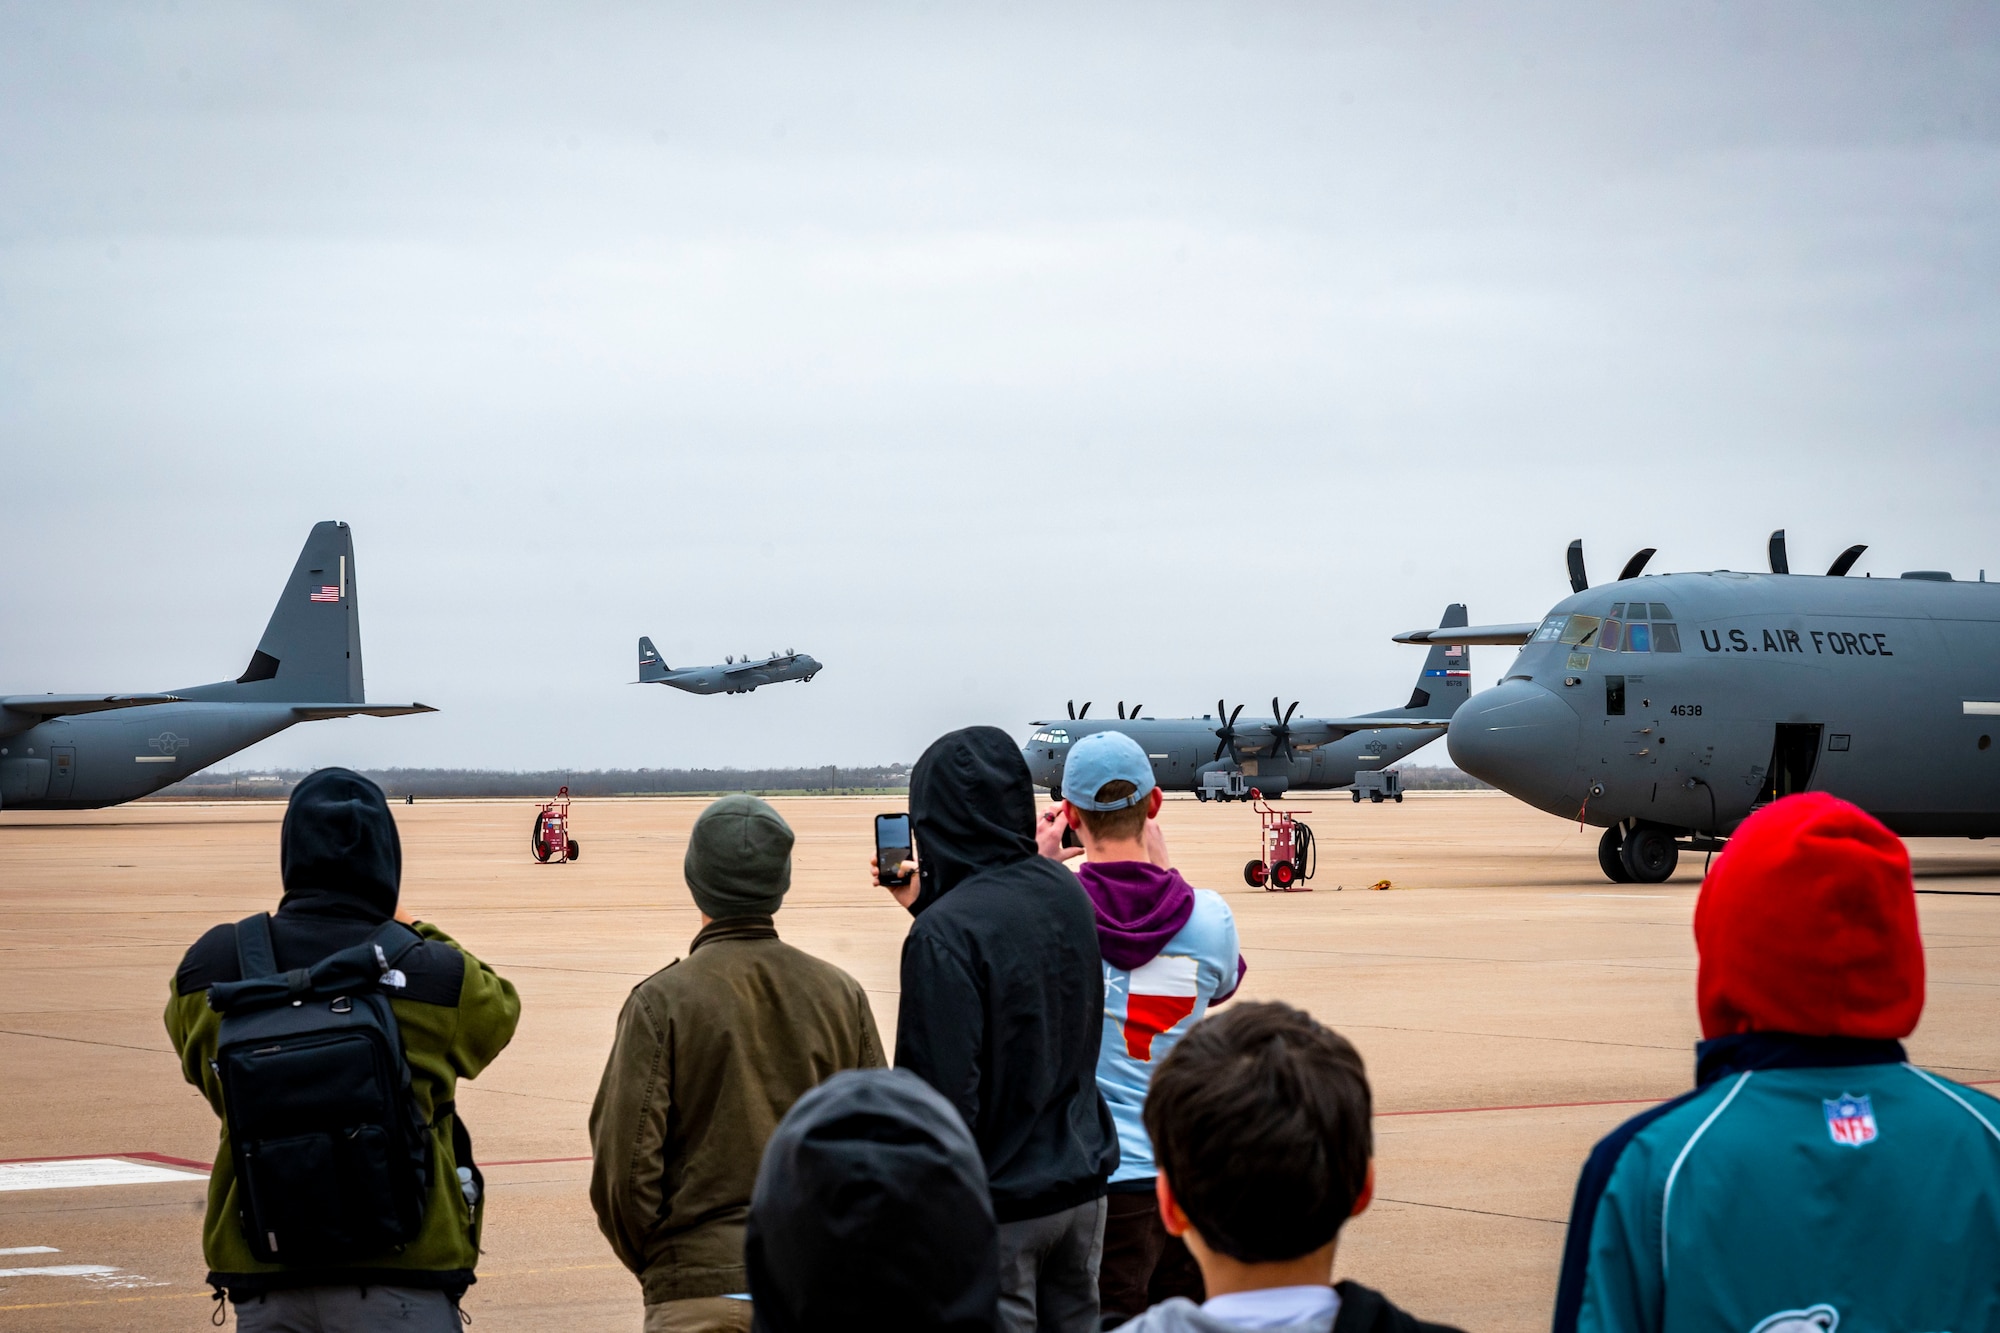 A U.S. Air Force C-130J Super Hercules carrying service members from the 317th Airlift Wing takes off on the flight line for a deployment at Dyess Air Force Base, Texas, Feb. 25, 2023. Members from the 317th were deployed to the Middle East in support of the U.S. Central Command’s continued mission of enabling military operations and activities with allies and partners to increase regional security and stability in support of enduring U.S. interests. (U.S. Air Force photo by Senior Airman Leon Redfern)